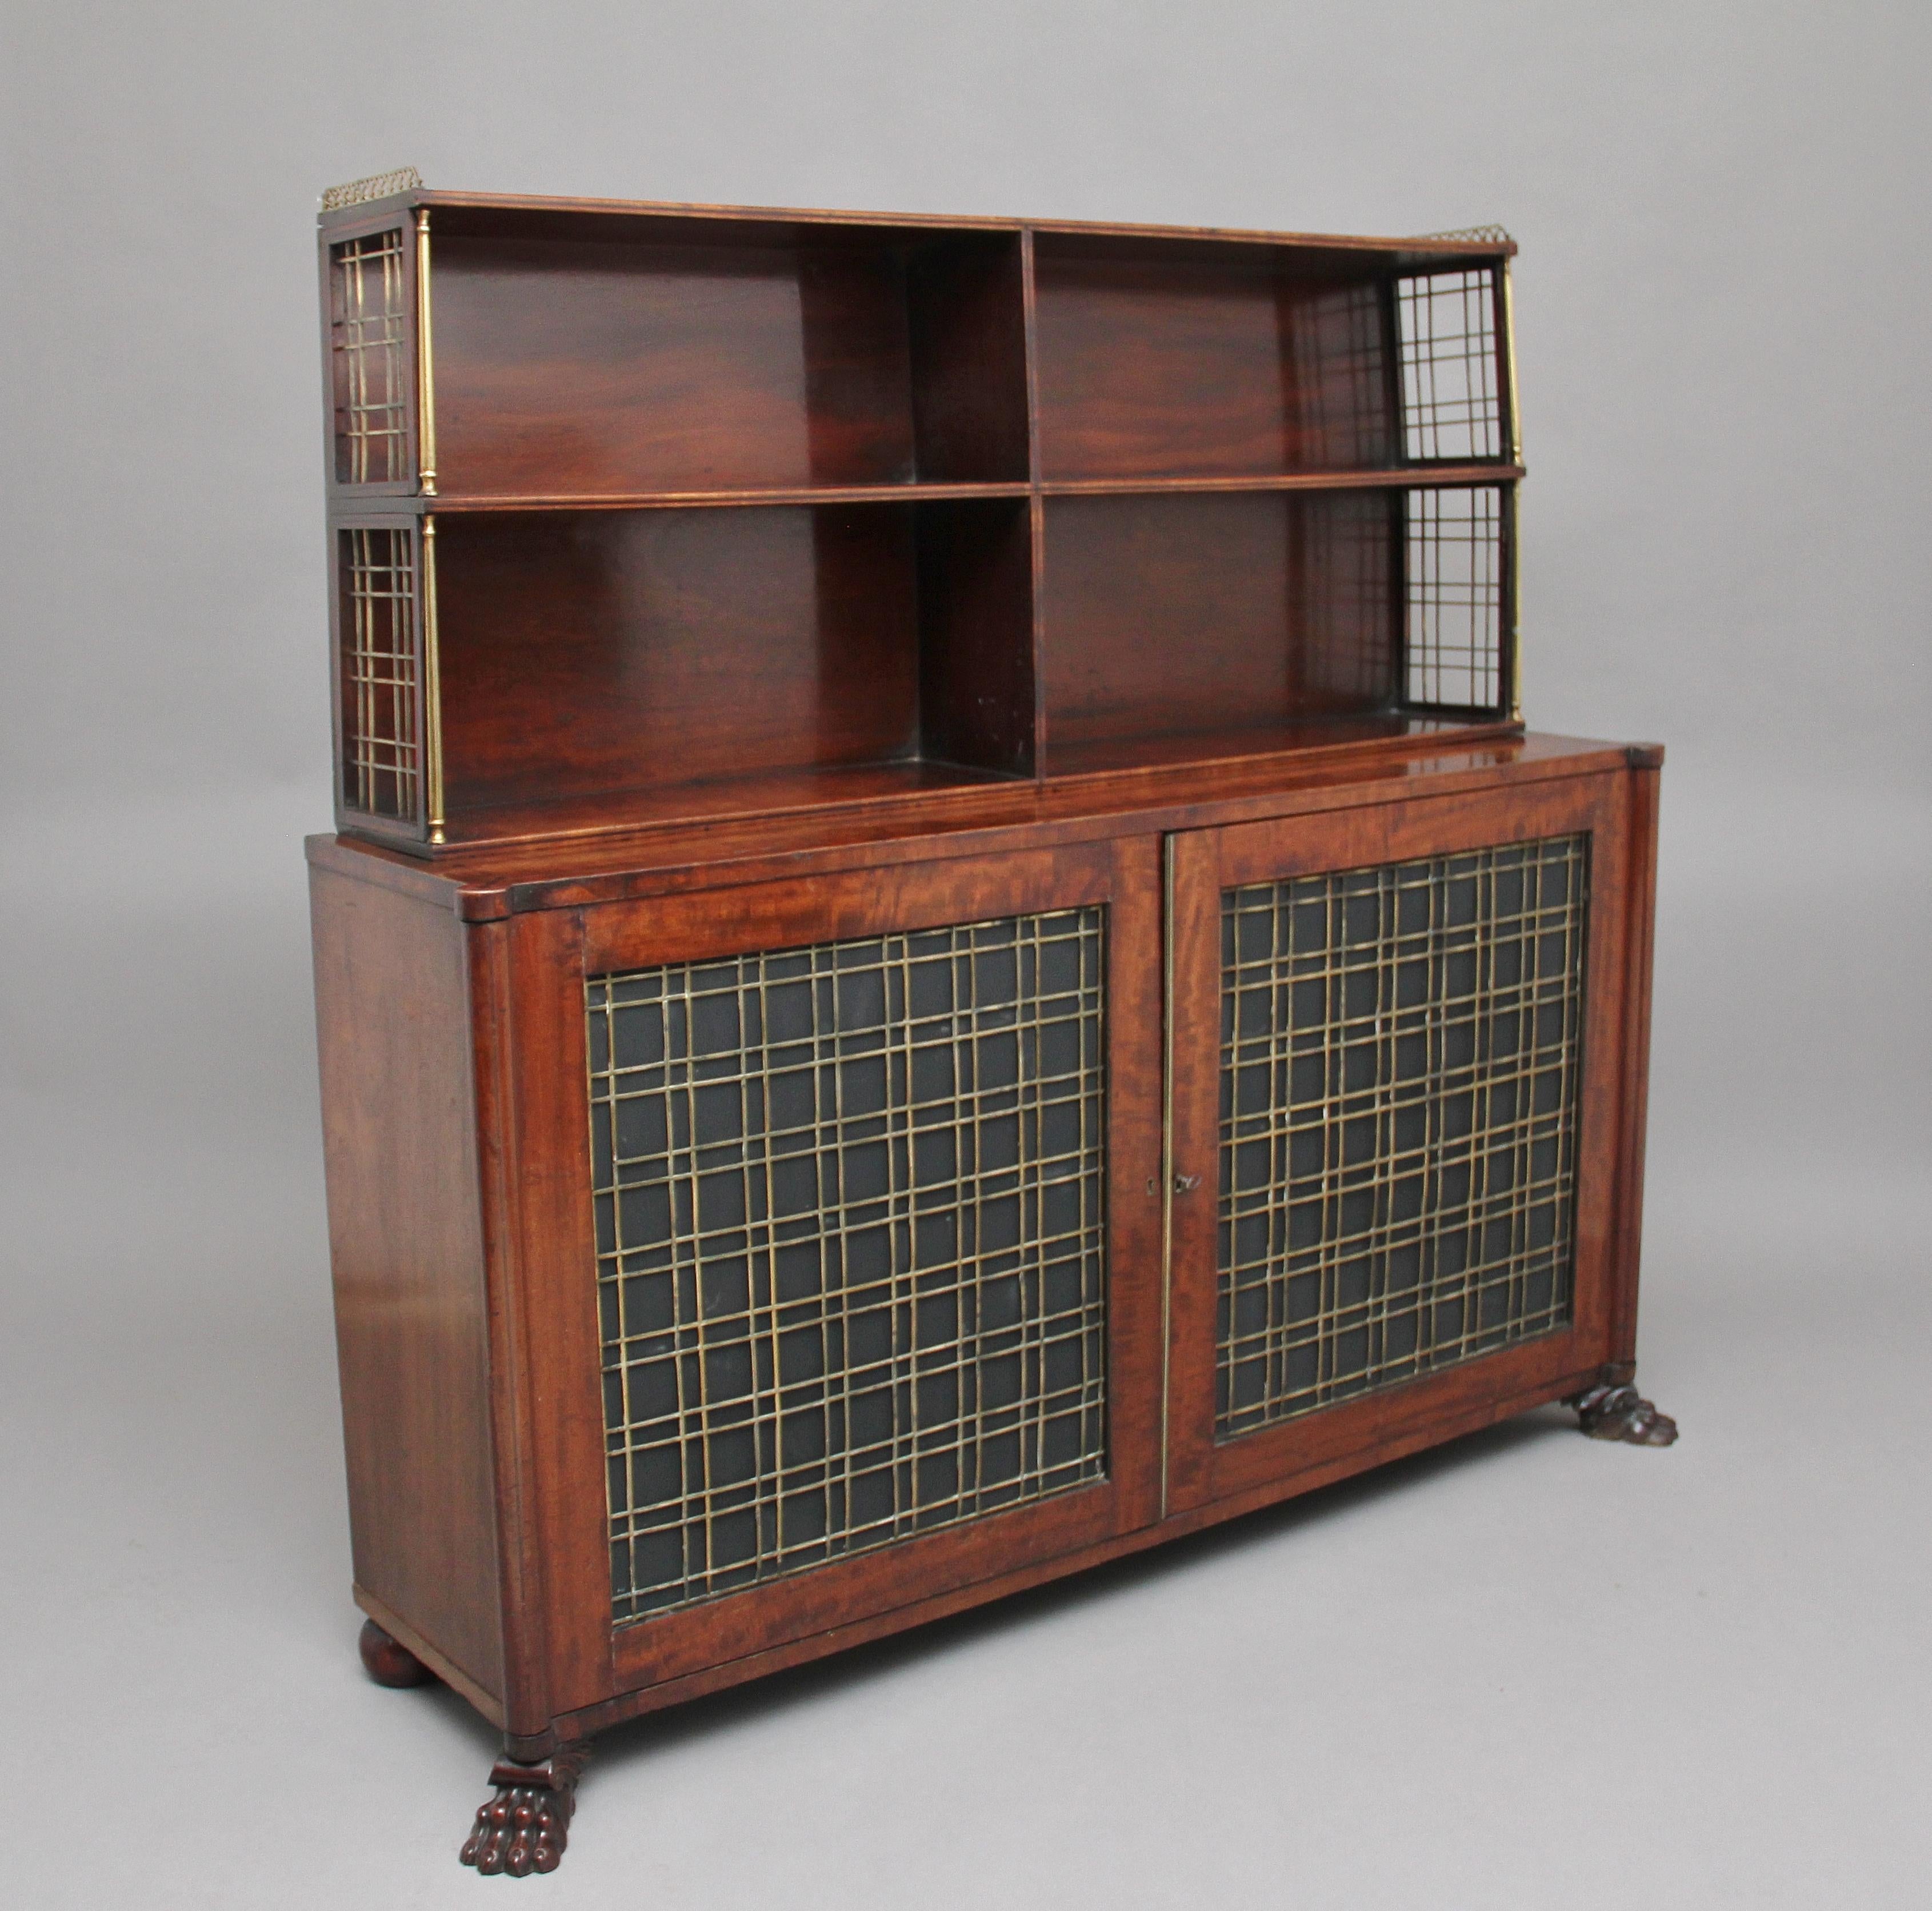 A lovely quality early 19th century mahogany cabinet of good proportions, having a decorative brass pierced gallery running along the top, the top shelf section divided into four compartments with ebony inlay on the shelve fronts and having brass